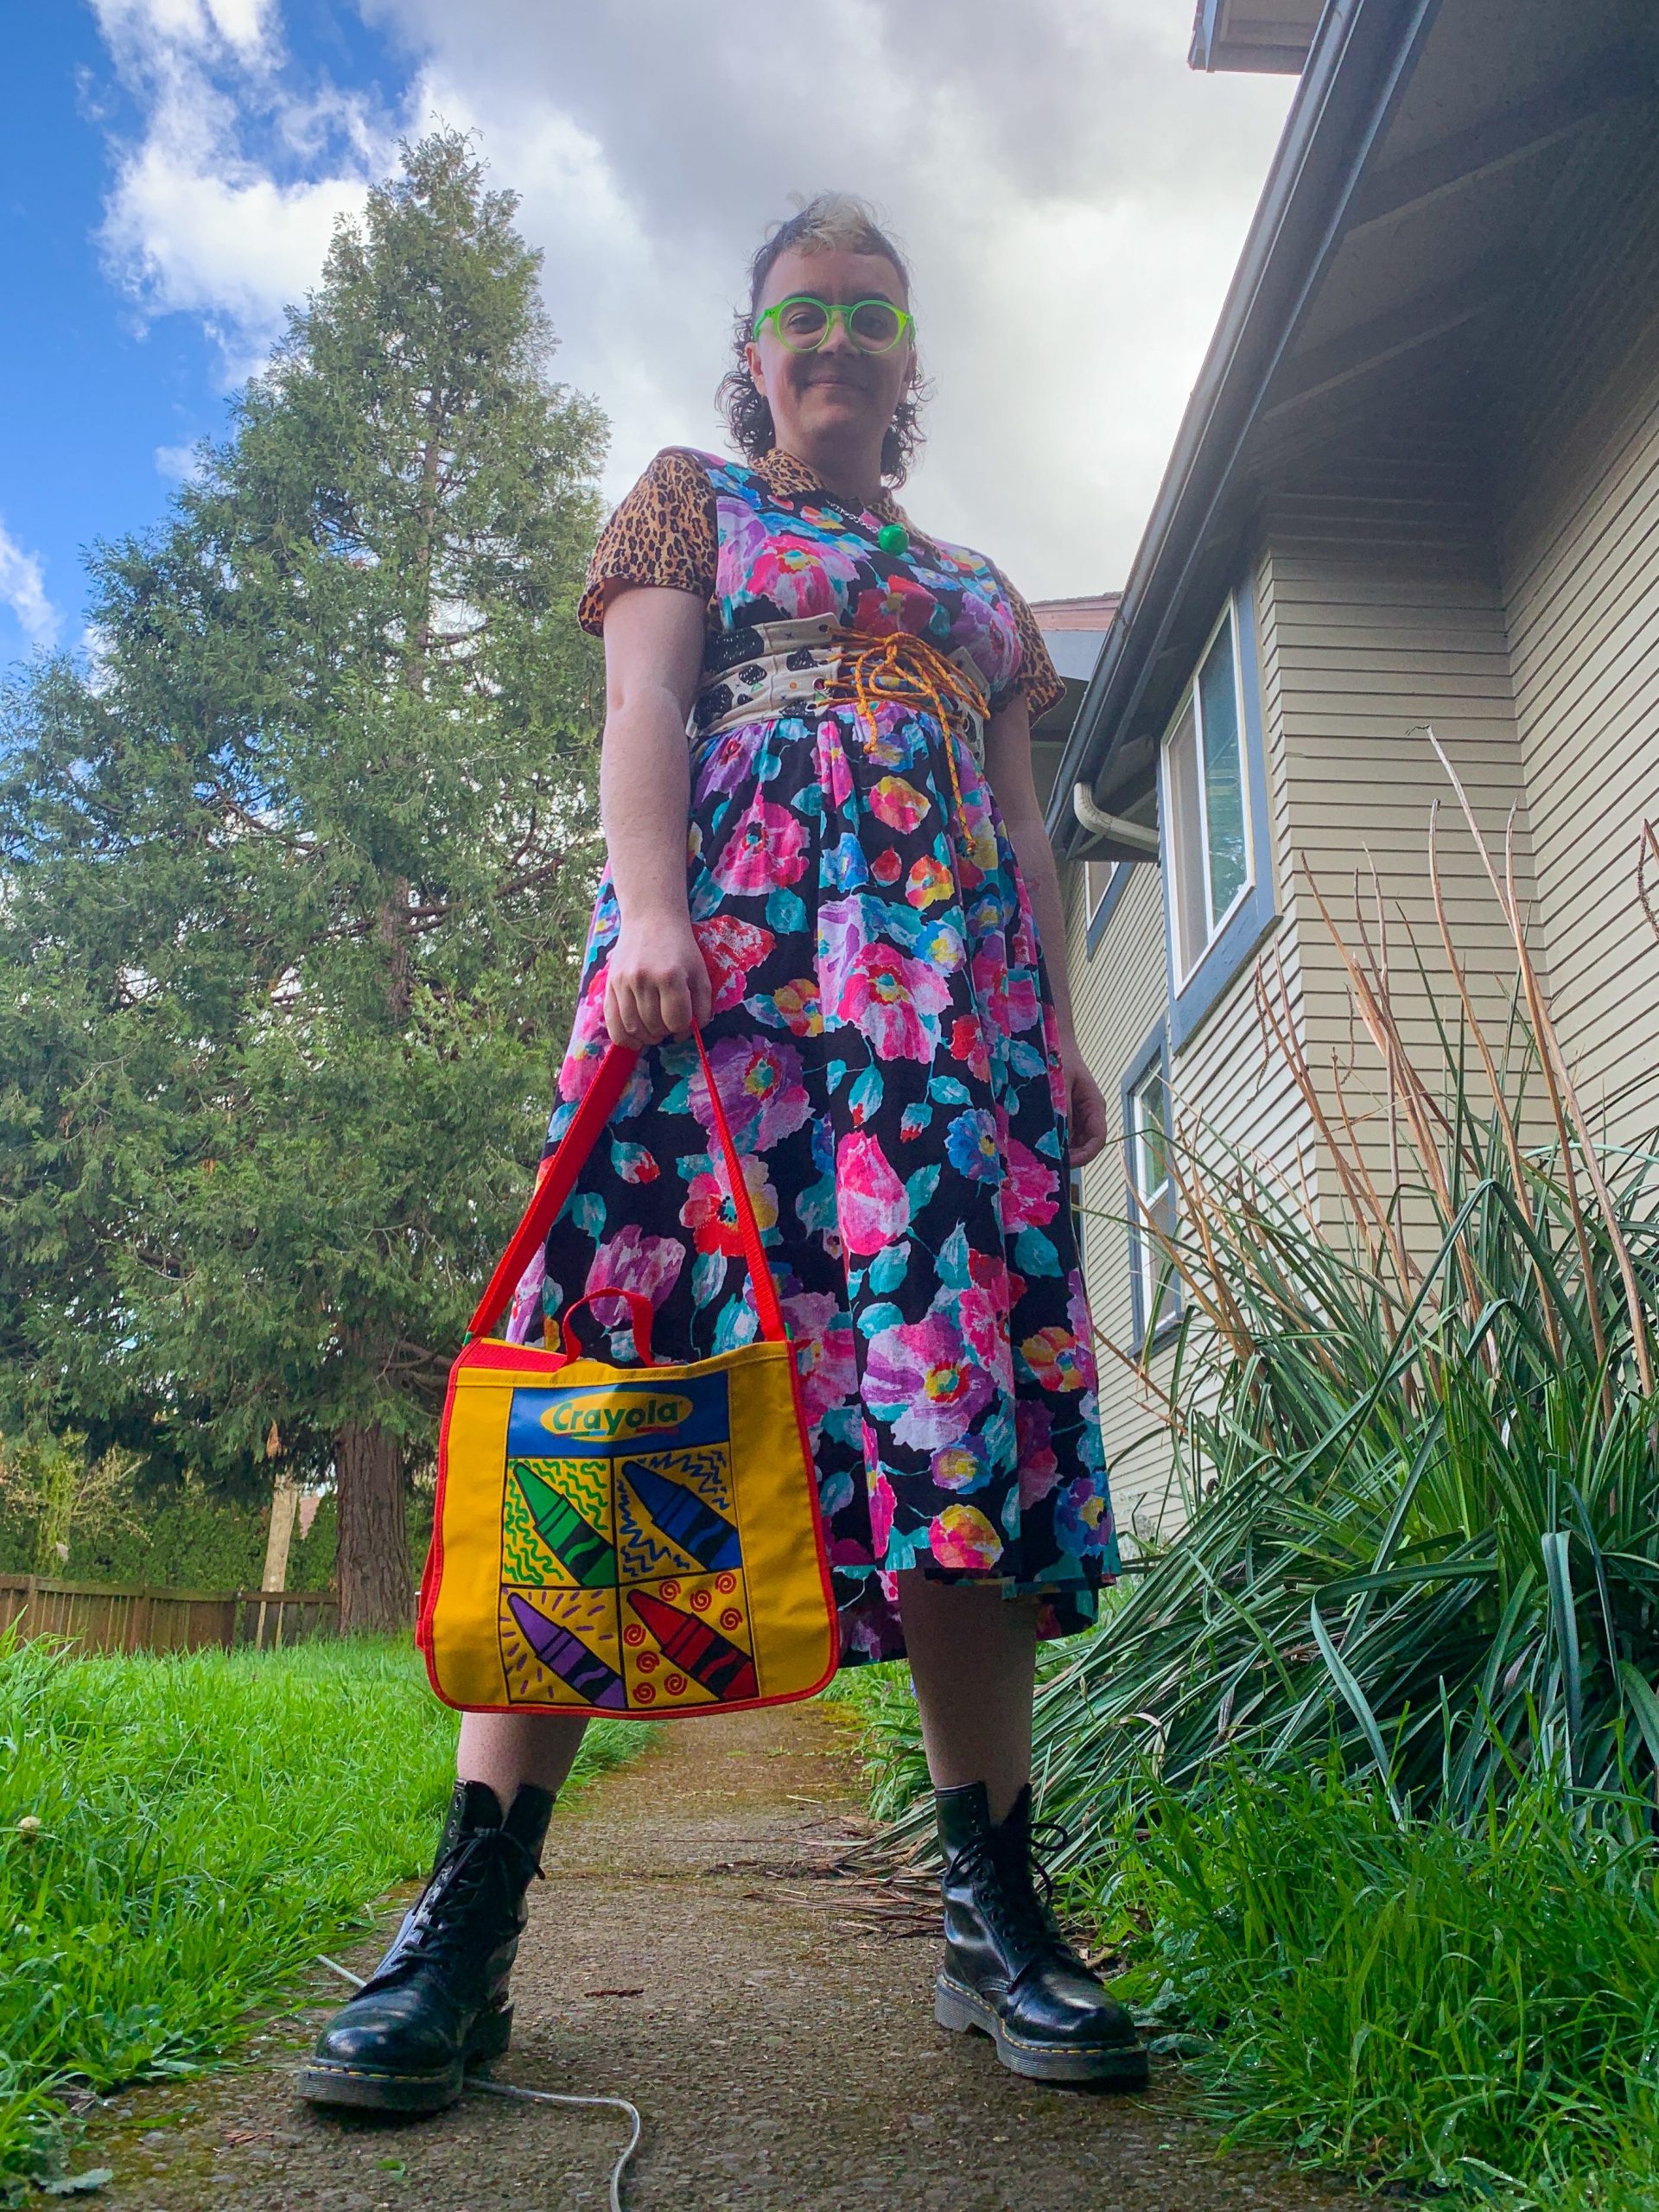 Photo of Juniper, a white autigender person with a brown and blond mullet, neon green glasses, a colorful short sleeved dressed patterned with flowers, a colorful crayola themed tote bag, and black Dr Martens standing powerfully in its backyard.